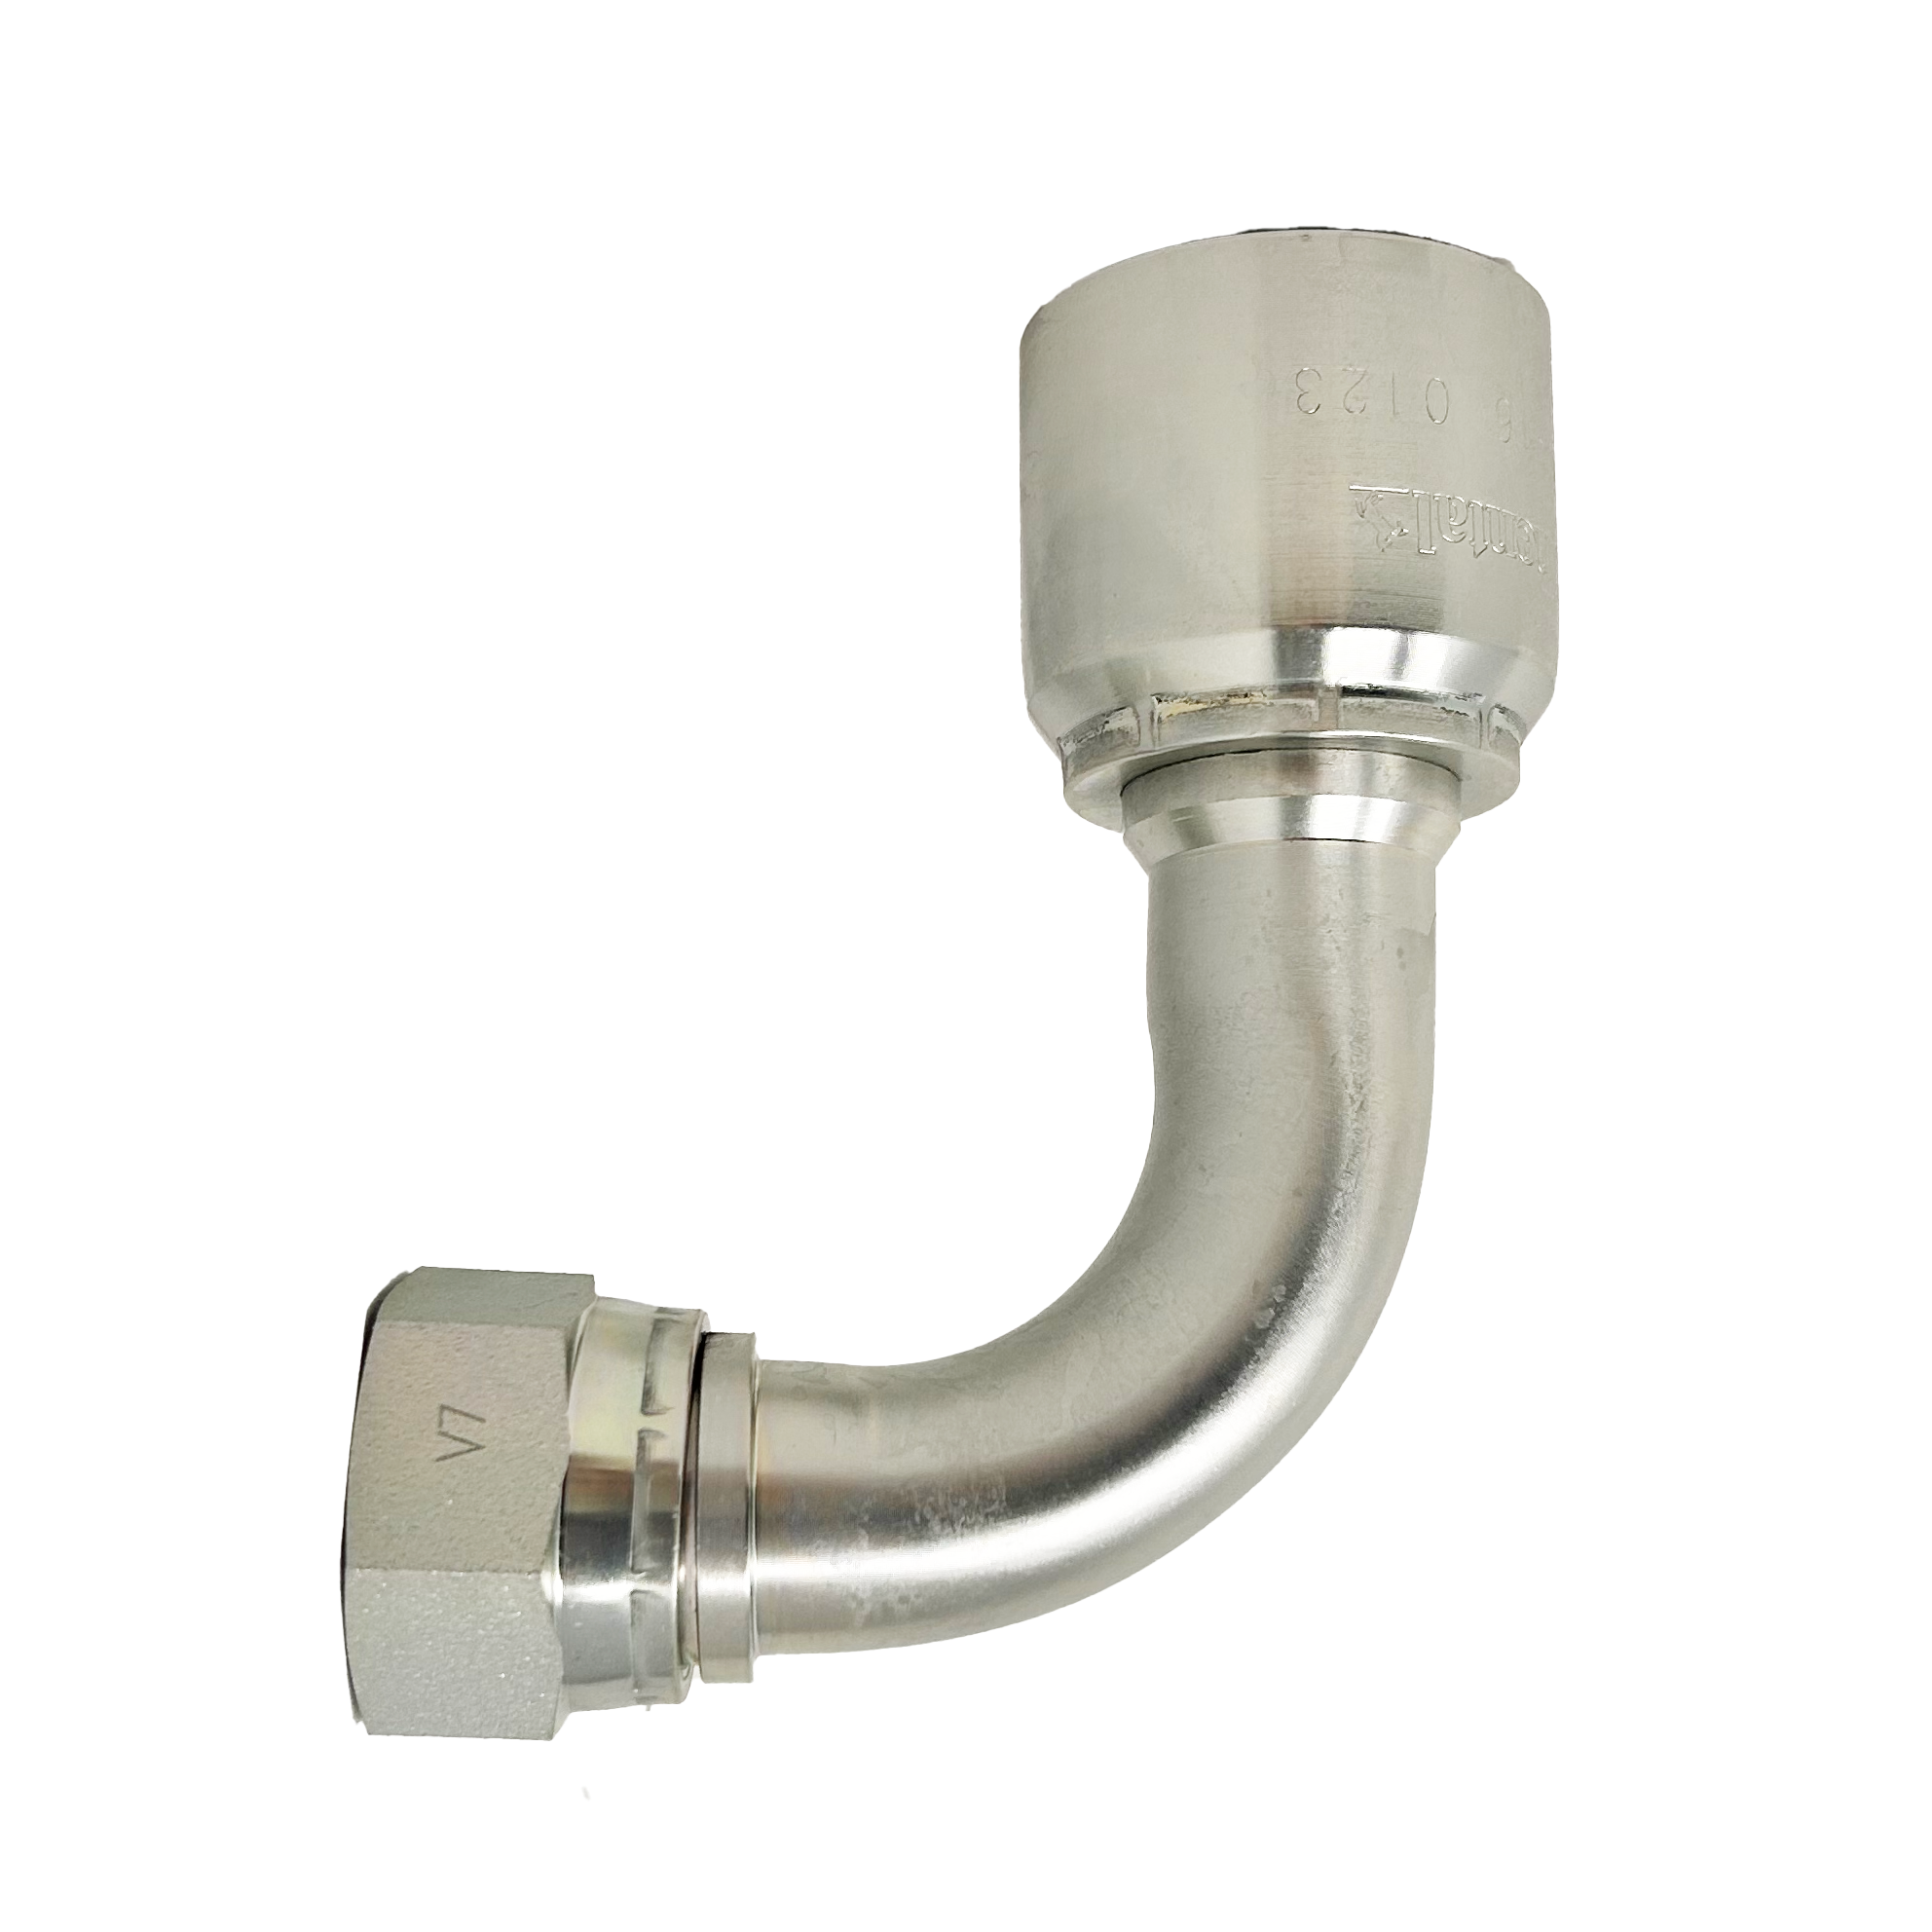 B2-JCFX90-0608: Continental Hose Fitting, 0.375 (3/8") Hose ID x 3/4-16 Female JIC, 90-Degree Swivel Connection